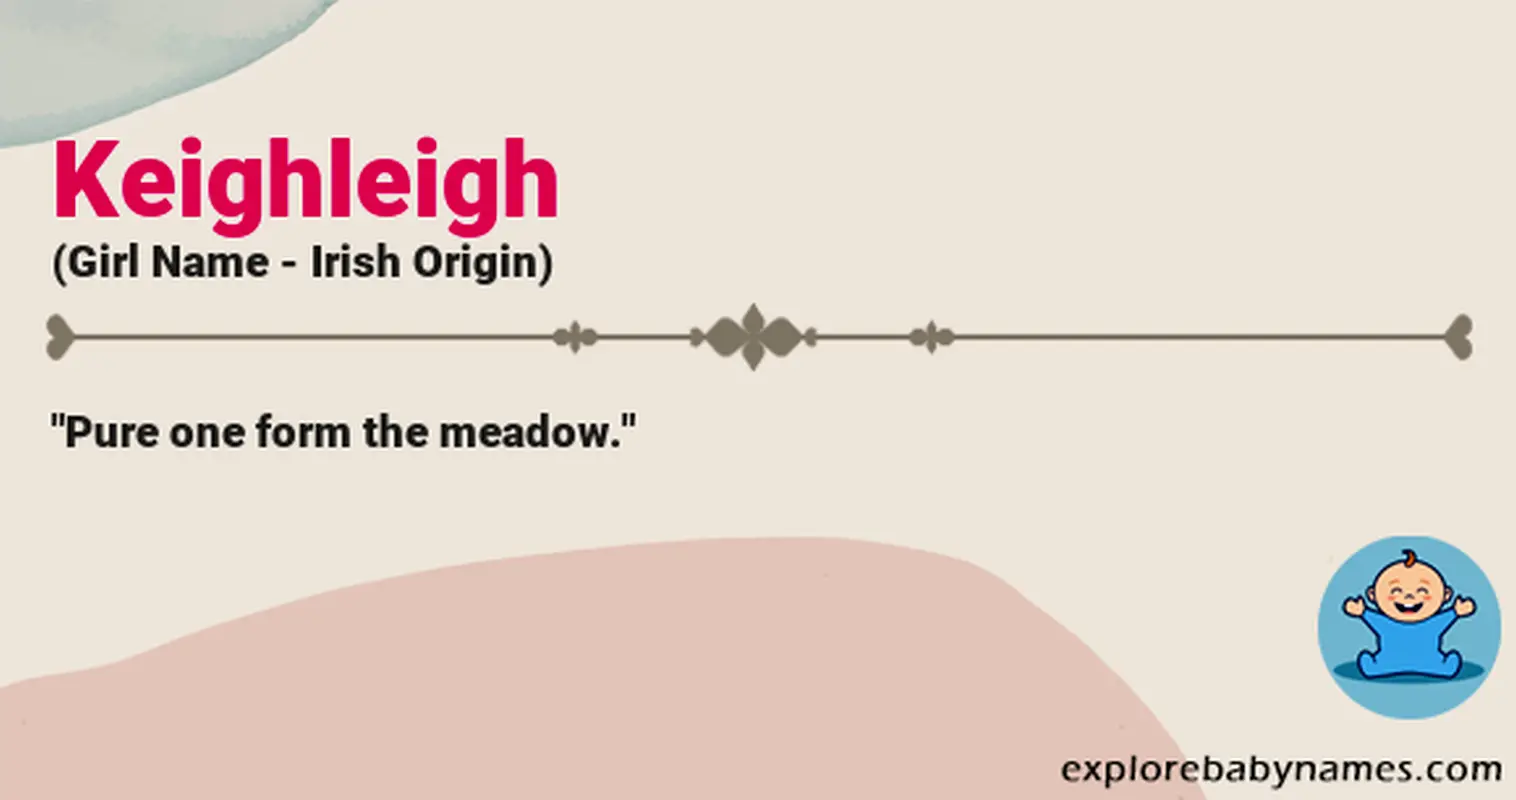 Meaning of Keighleigh